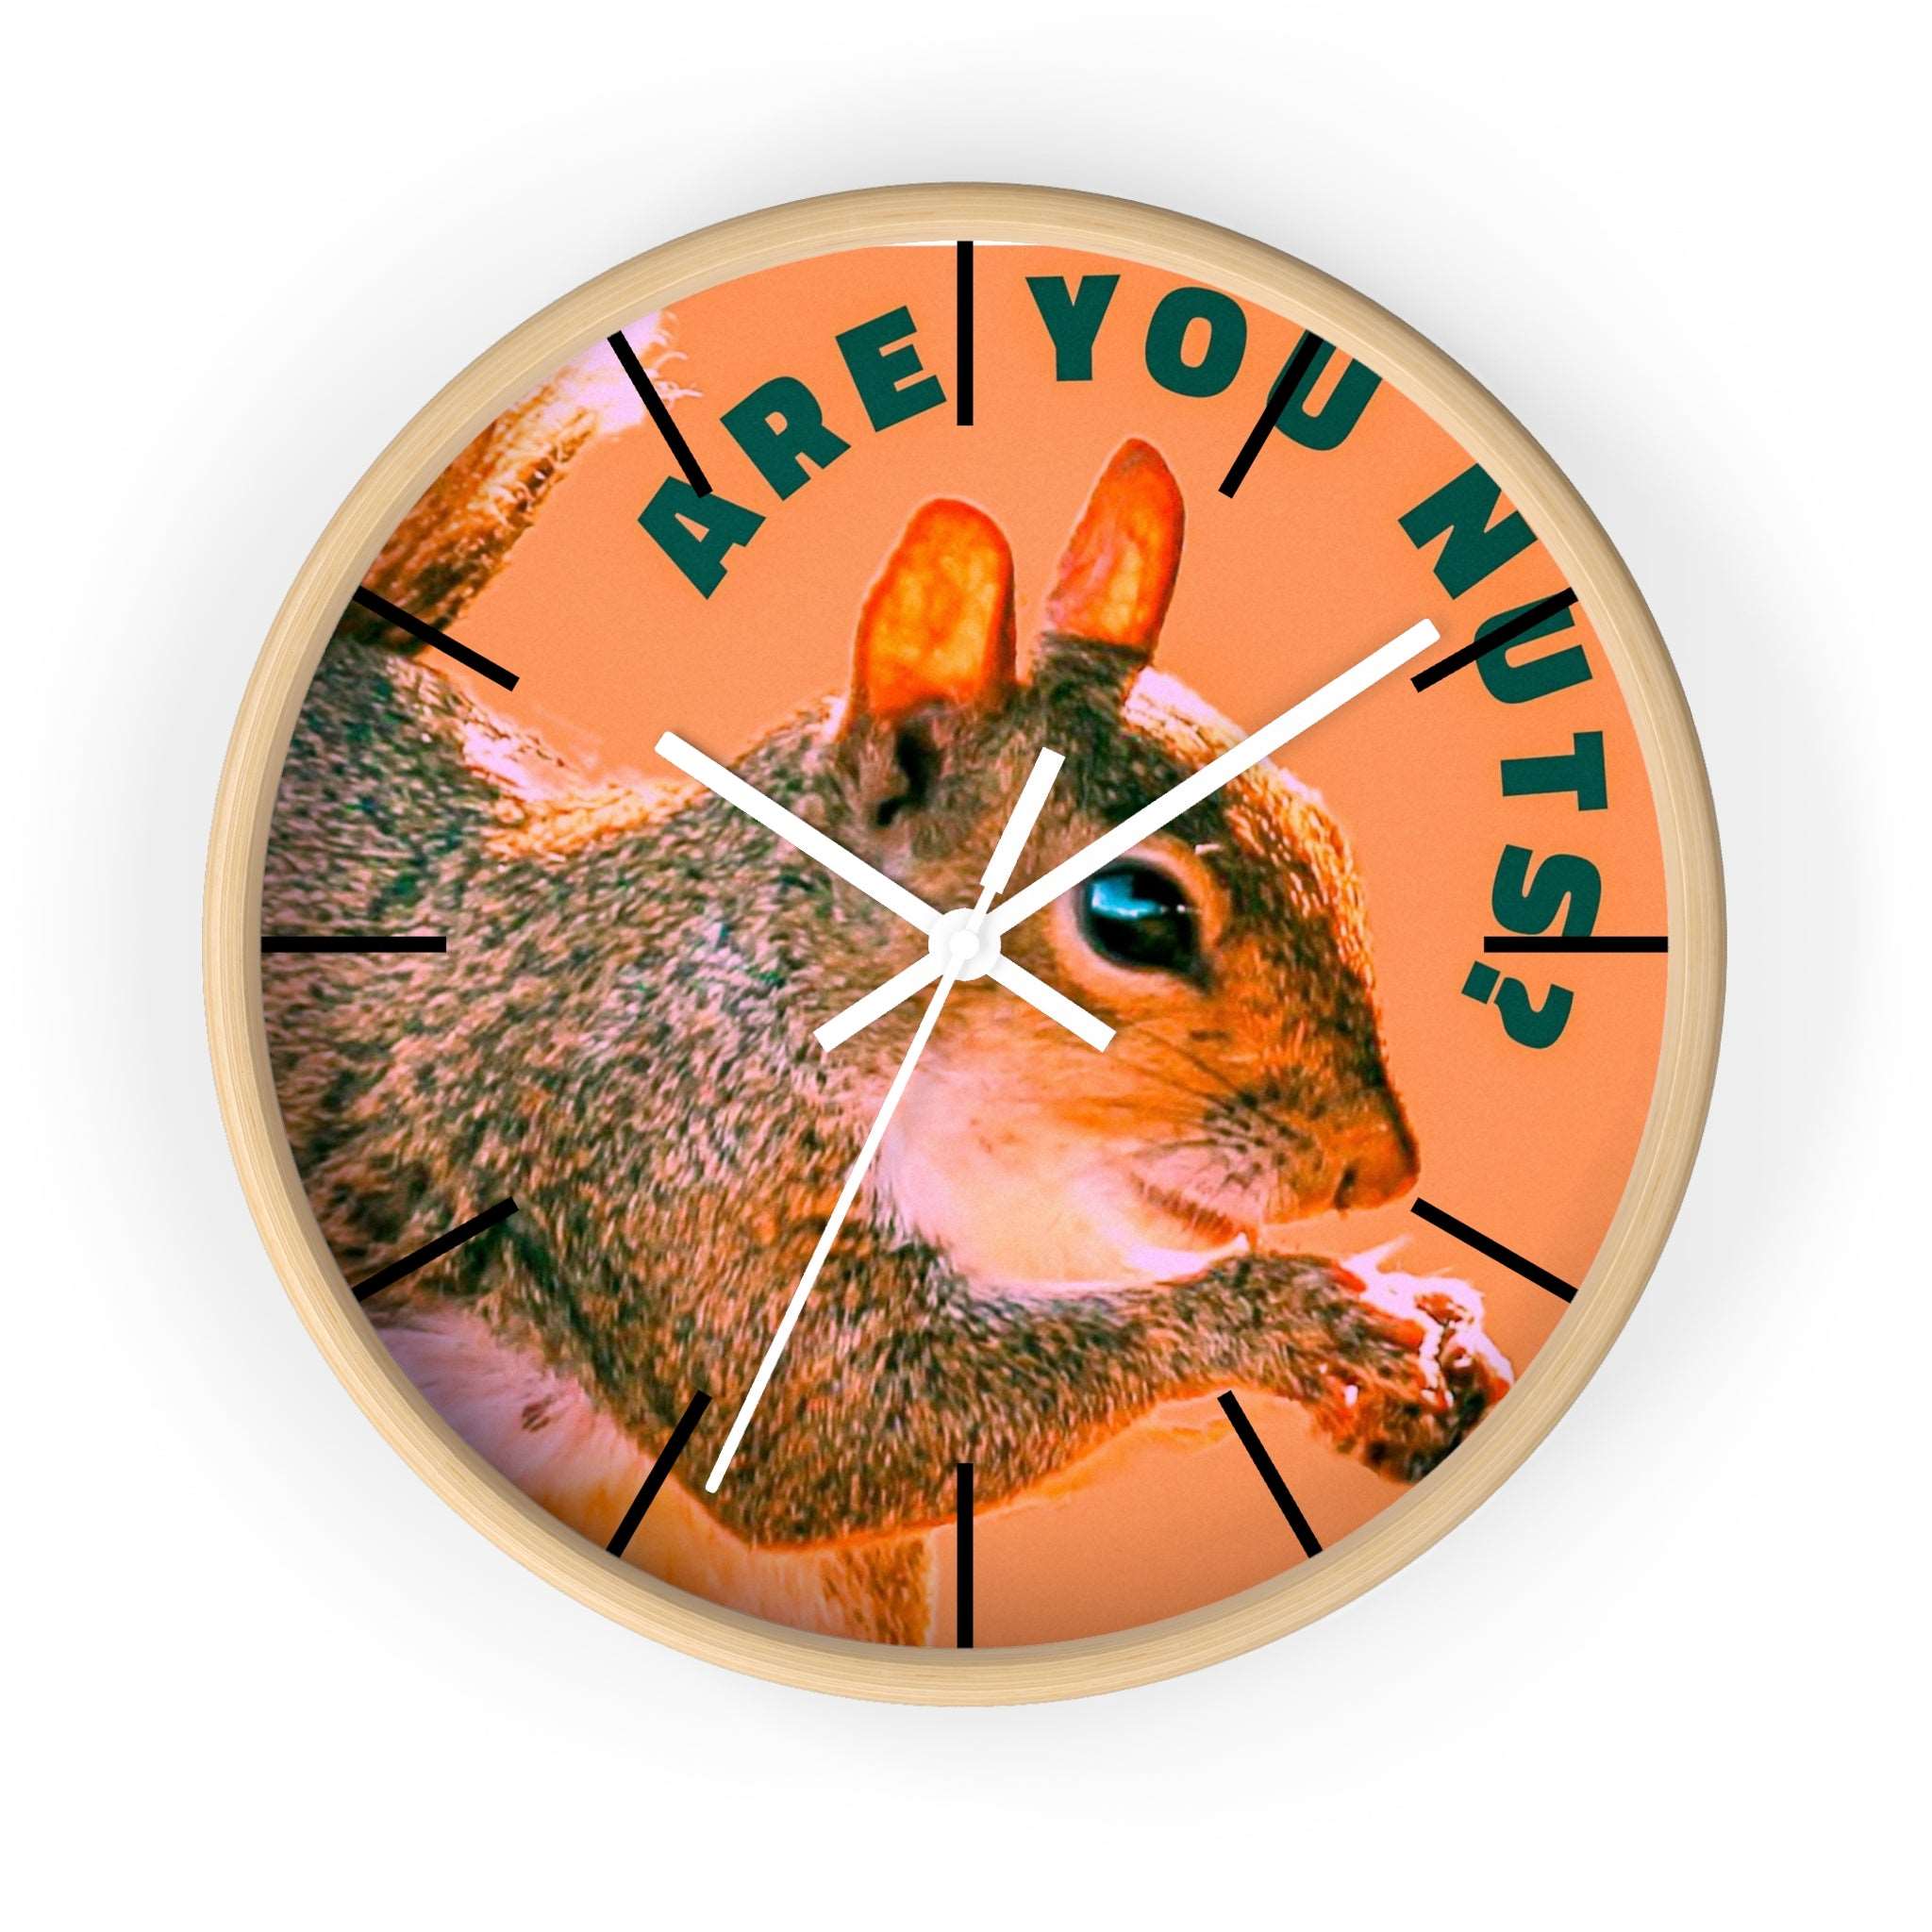 Are You Nuts? Squirrel Wall Clock